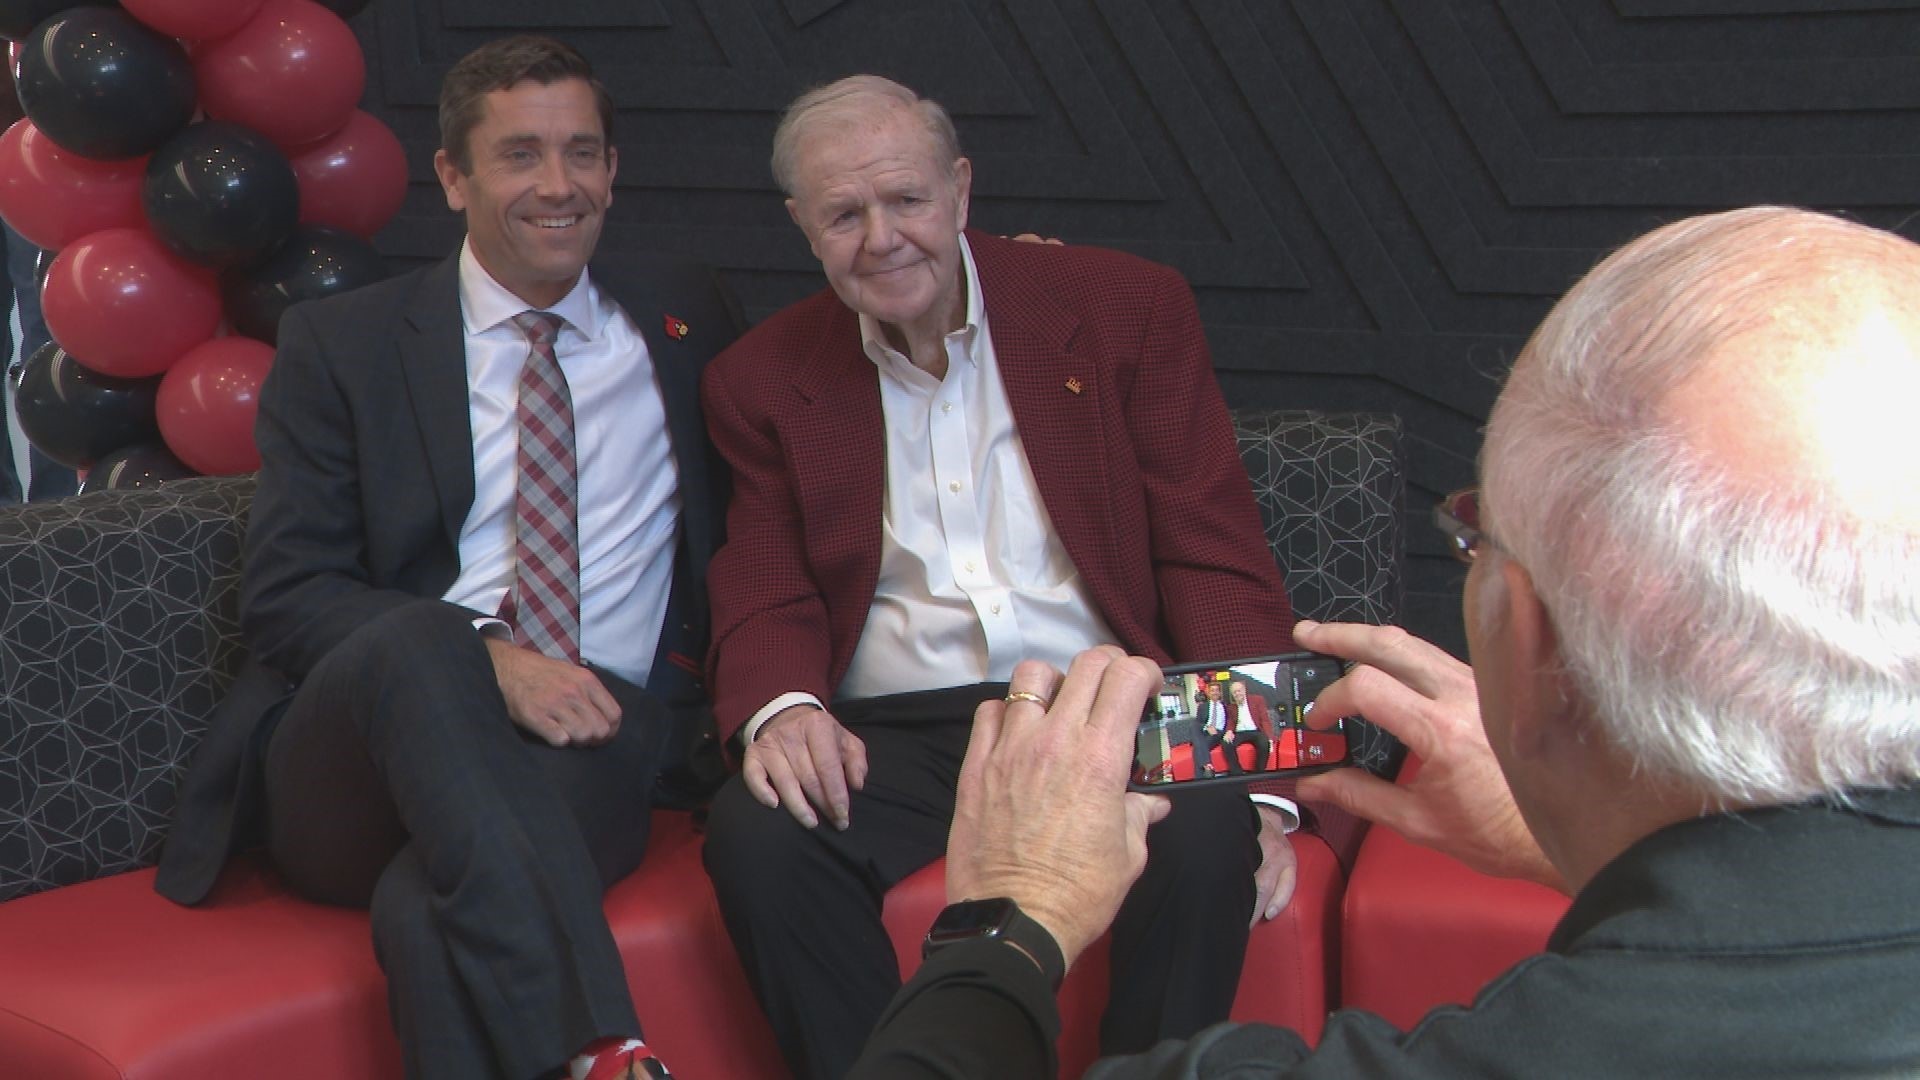 Over the years, Denny Crum's former players, fans and the community have always showed their appreciation for him.